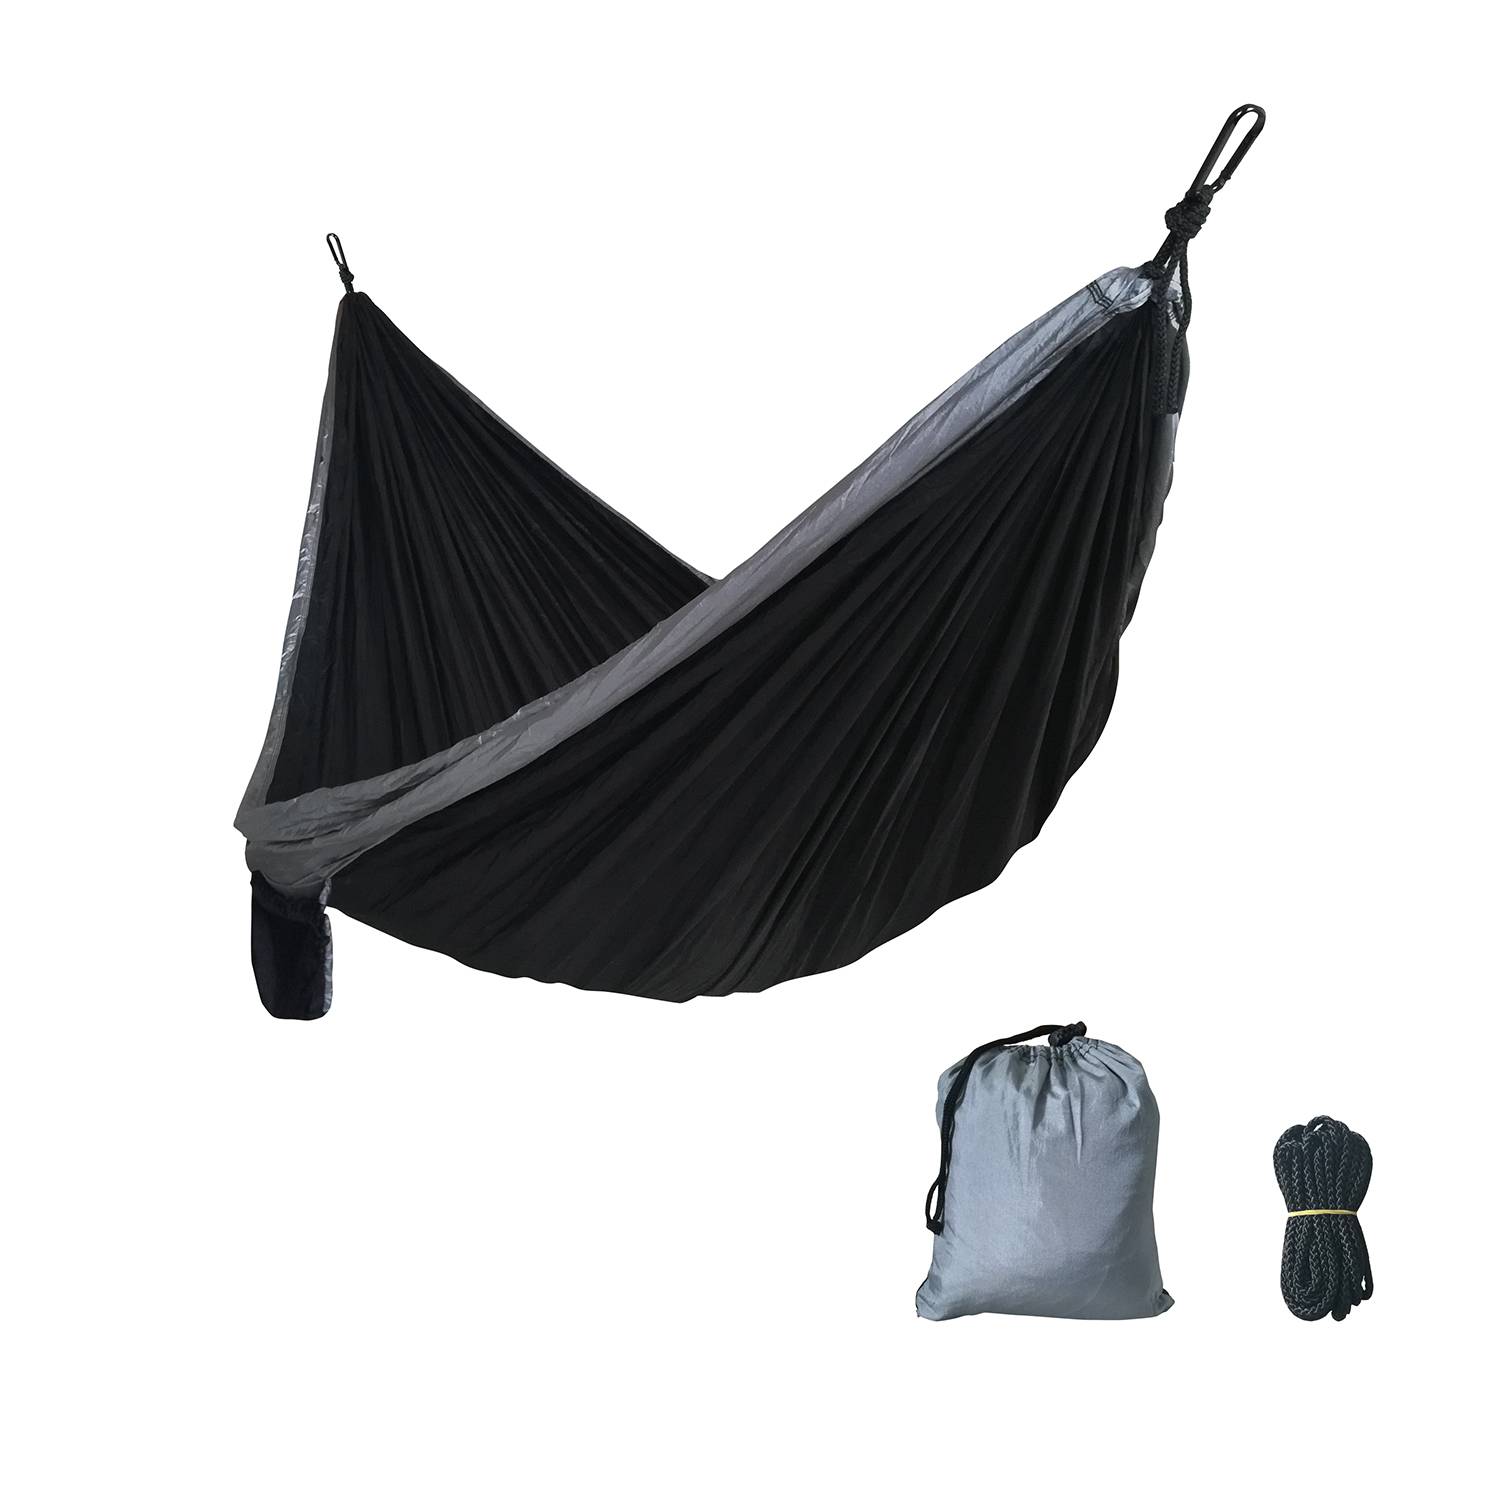 Hot New Products Hanging Basket Chair - Outdoor Light weight  Nylon Single Camping Hammock Parachute  Hammock – Top Asian